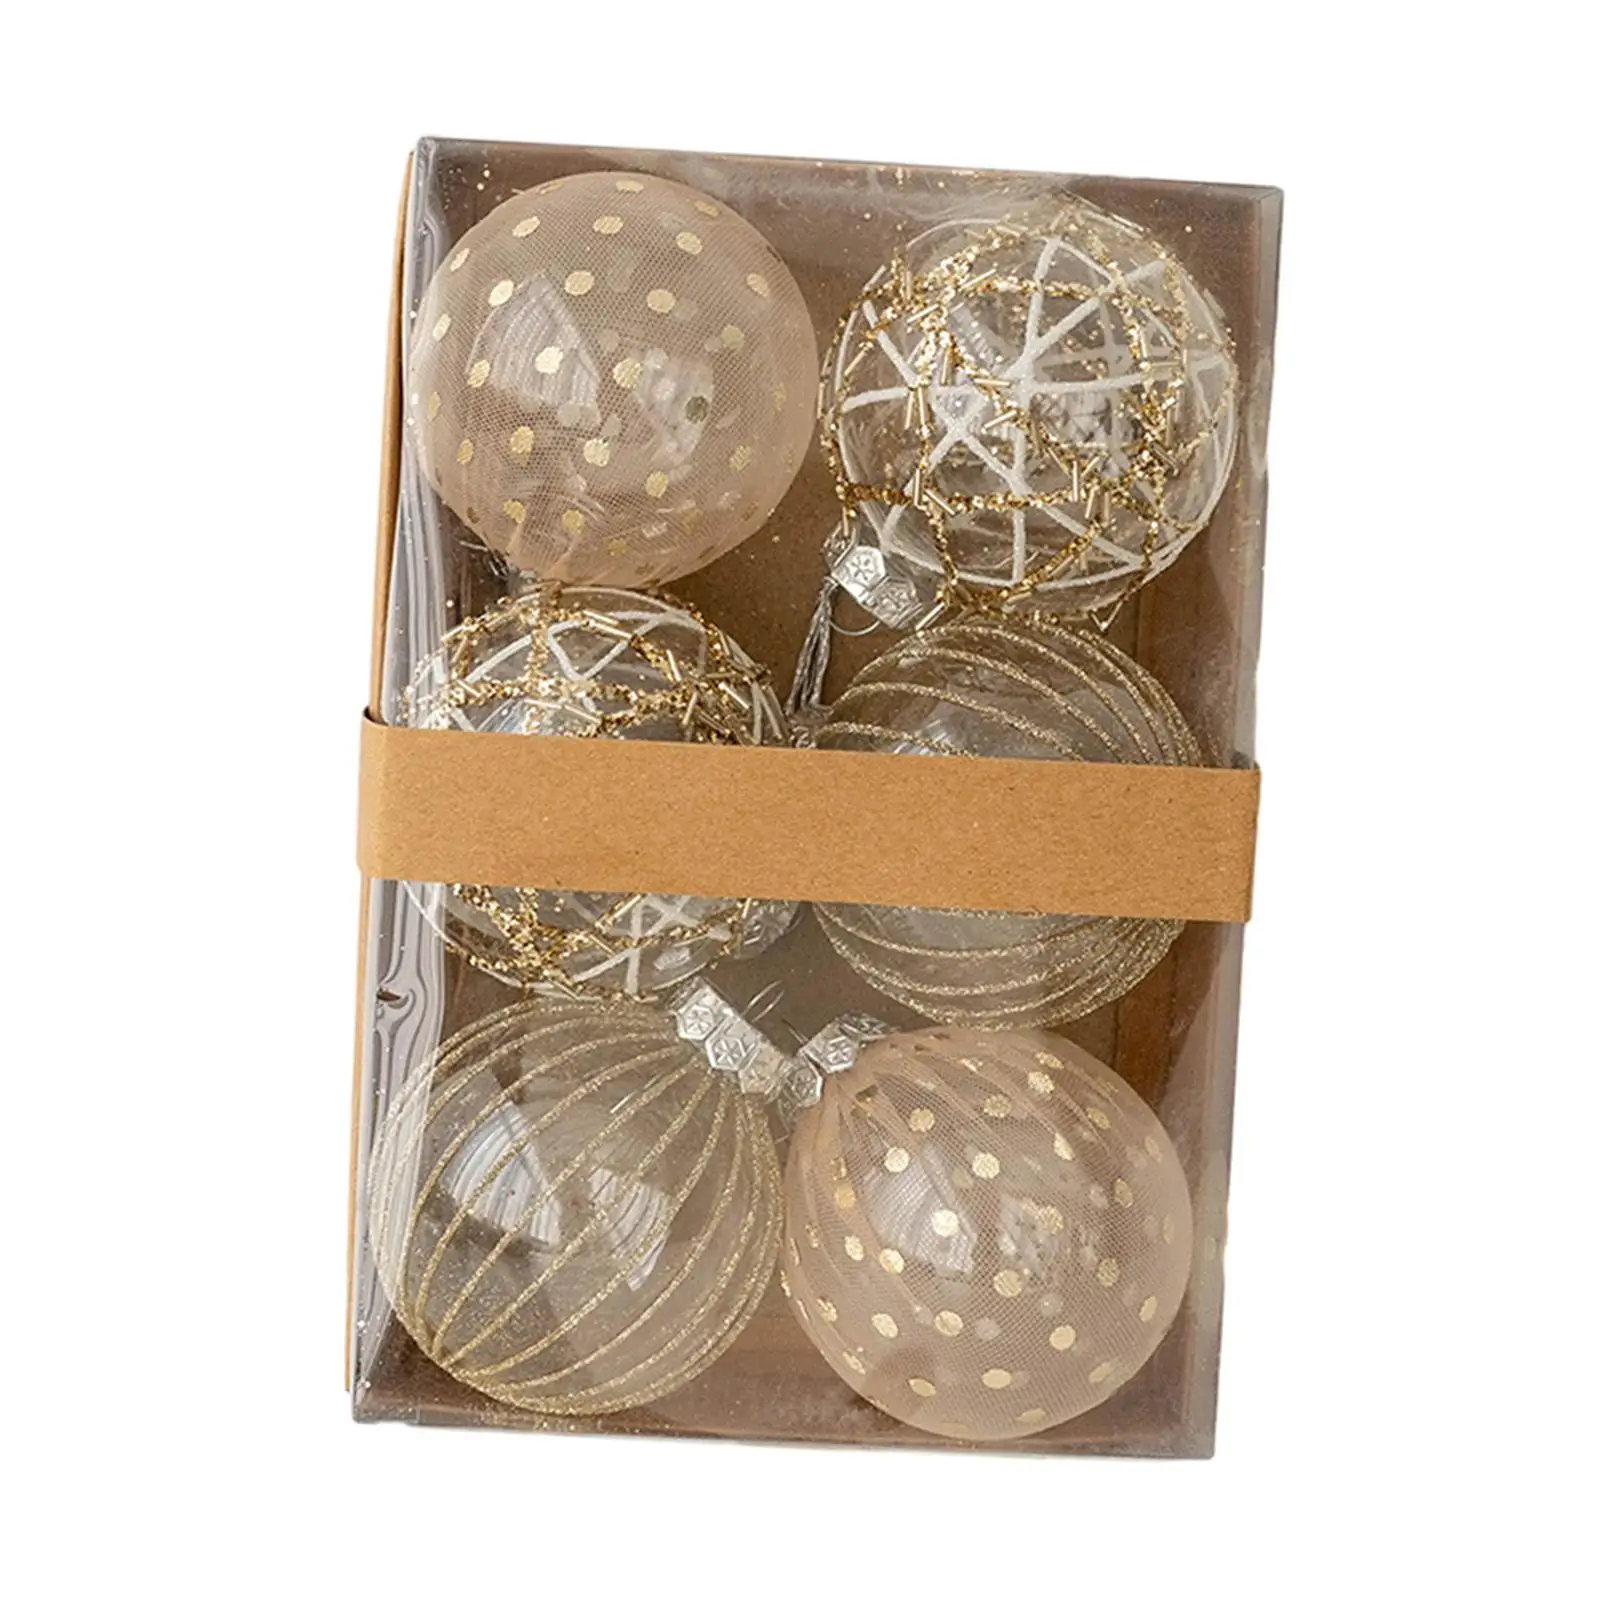 6x Christmas Balls Ornaments Hanging Crafts 8cm DIY with Hanging Loop Christmas Baubles for Halloween Party New Year